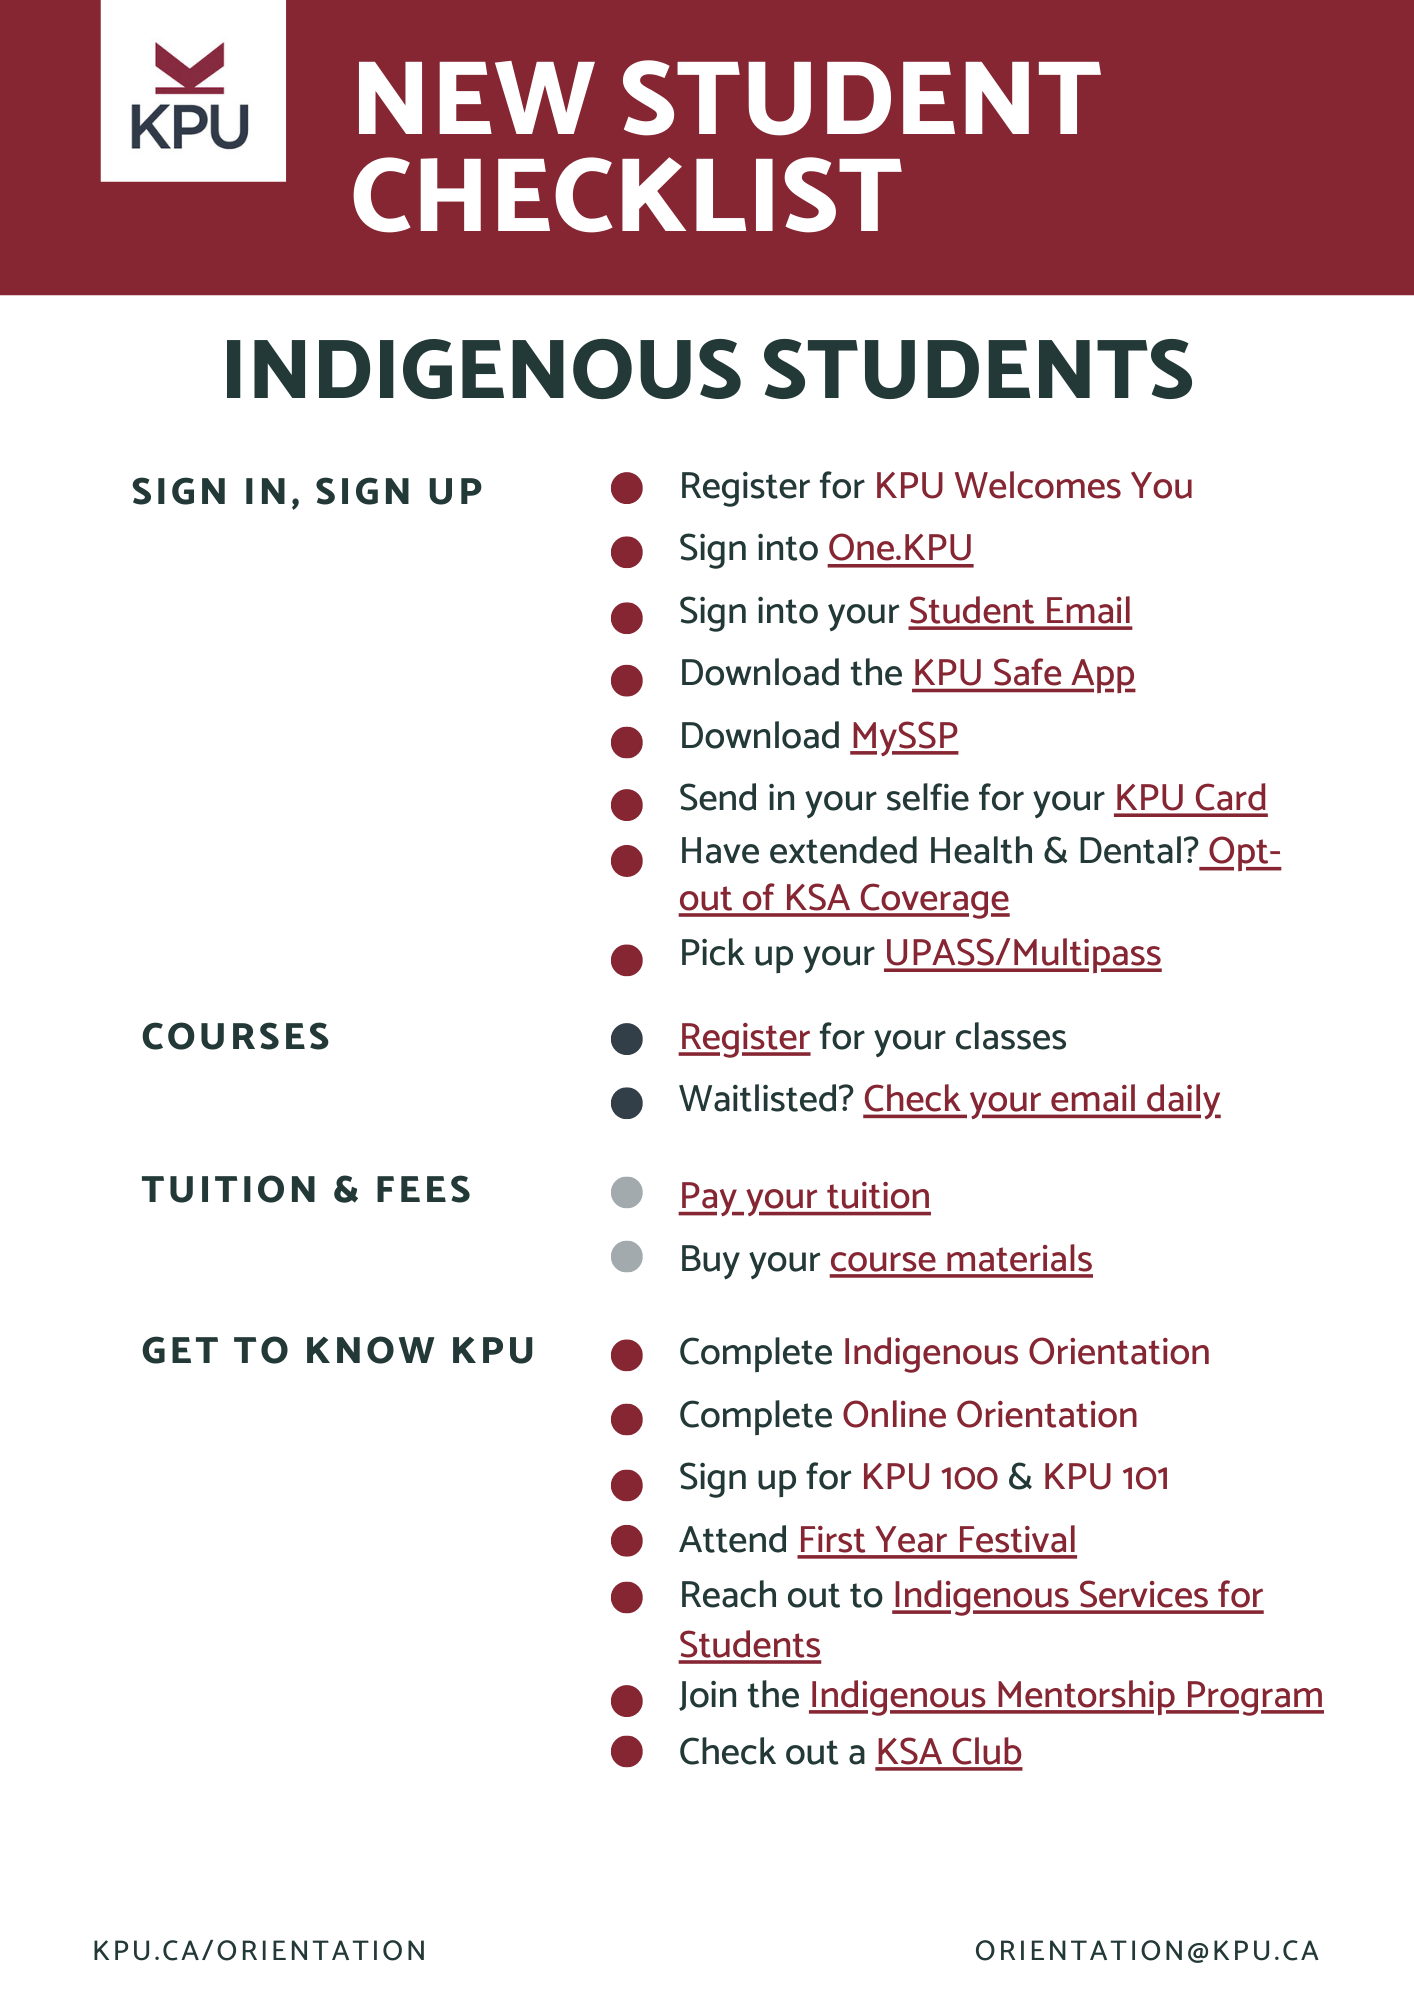 Indigenous New Student Checklist - Fall 2022